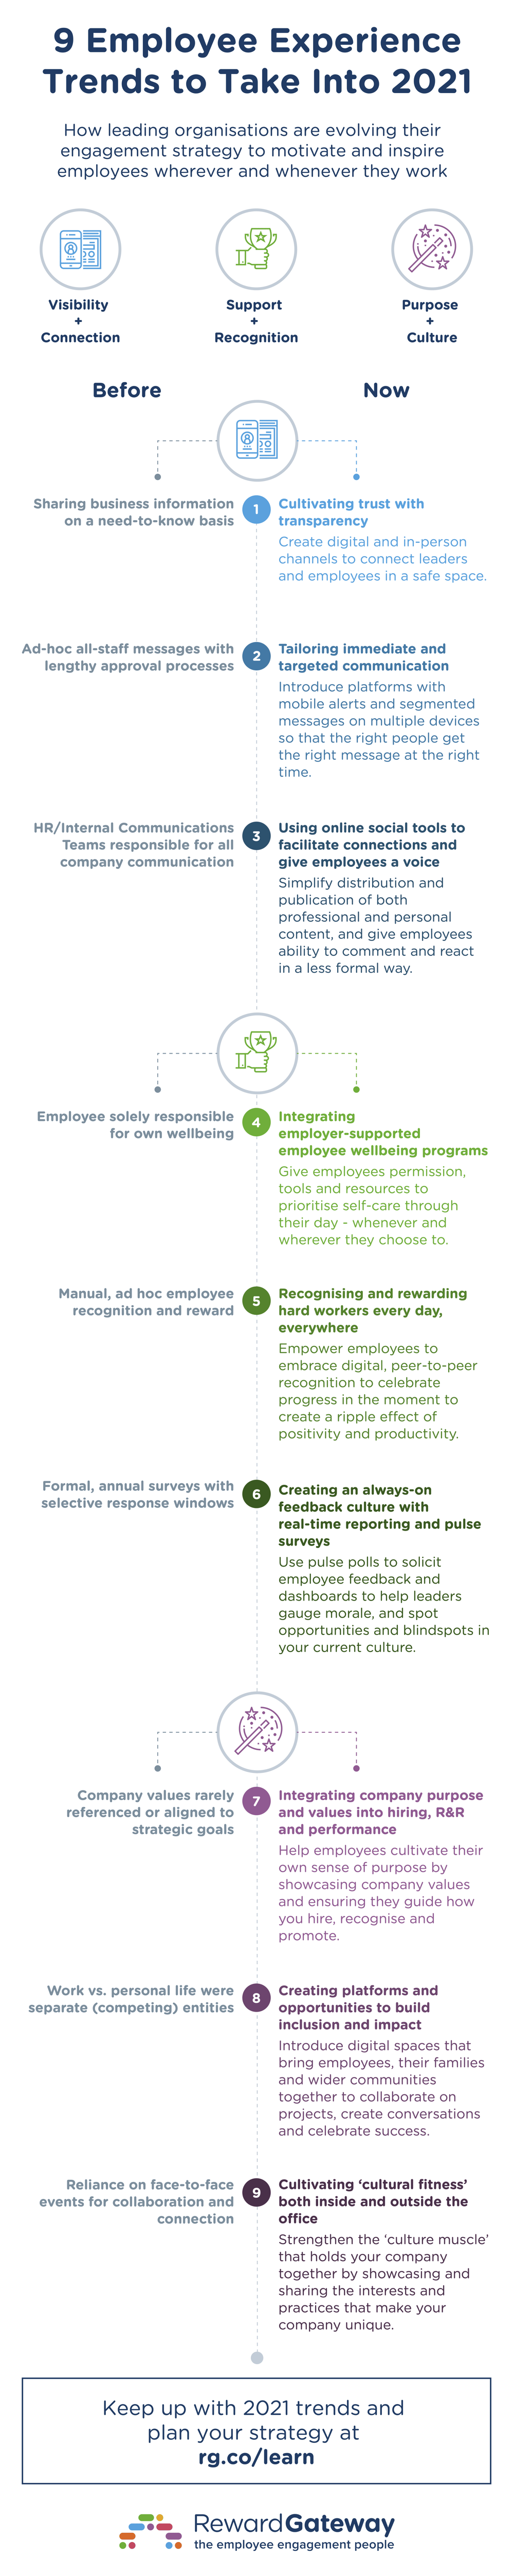 au-infographic-9-employee-experience-trends-to-take-into-2021